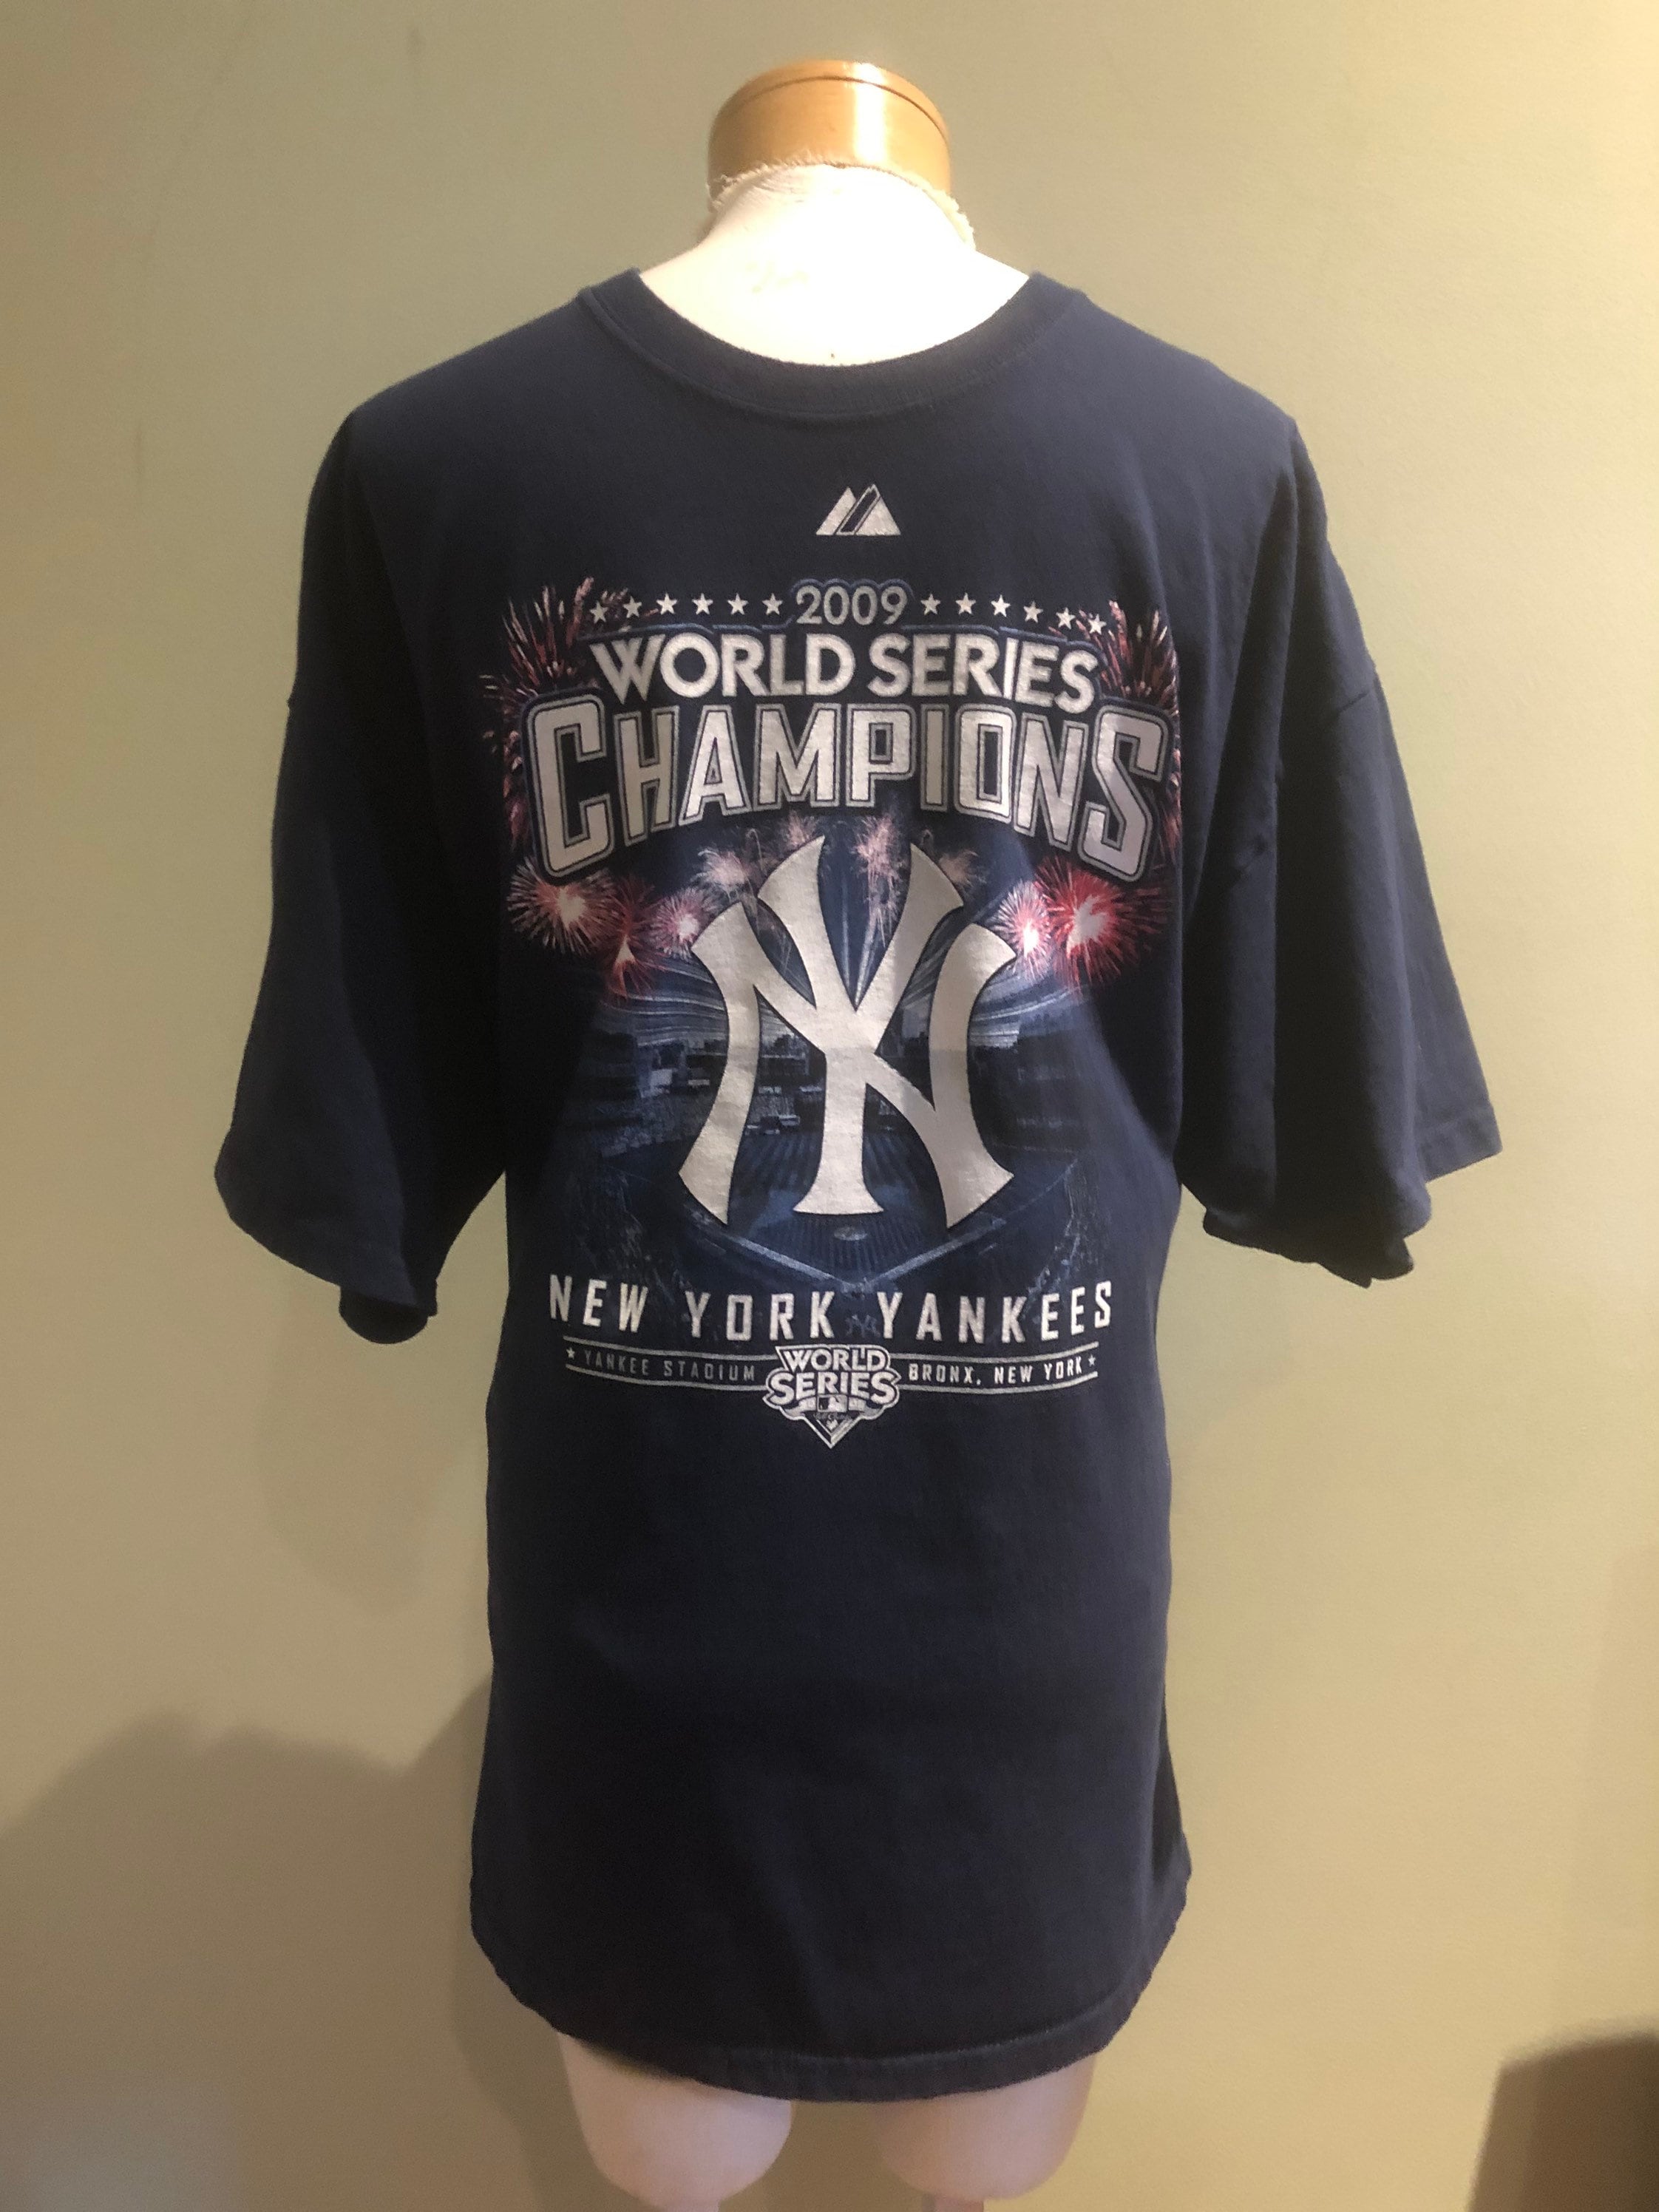 Derek Jeter #2 - NY Yankees: (2009: WS Champions - Jersey w/Tags!) -  clothing & accessories - by owner - apparel sale